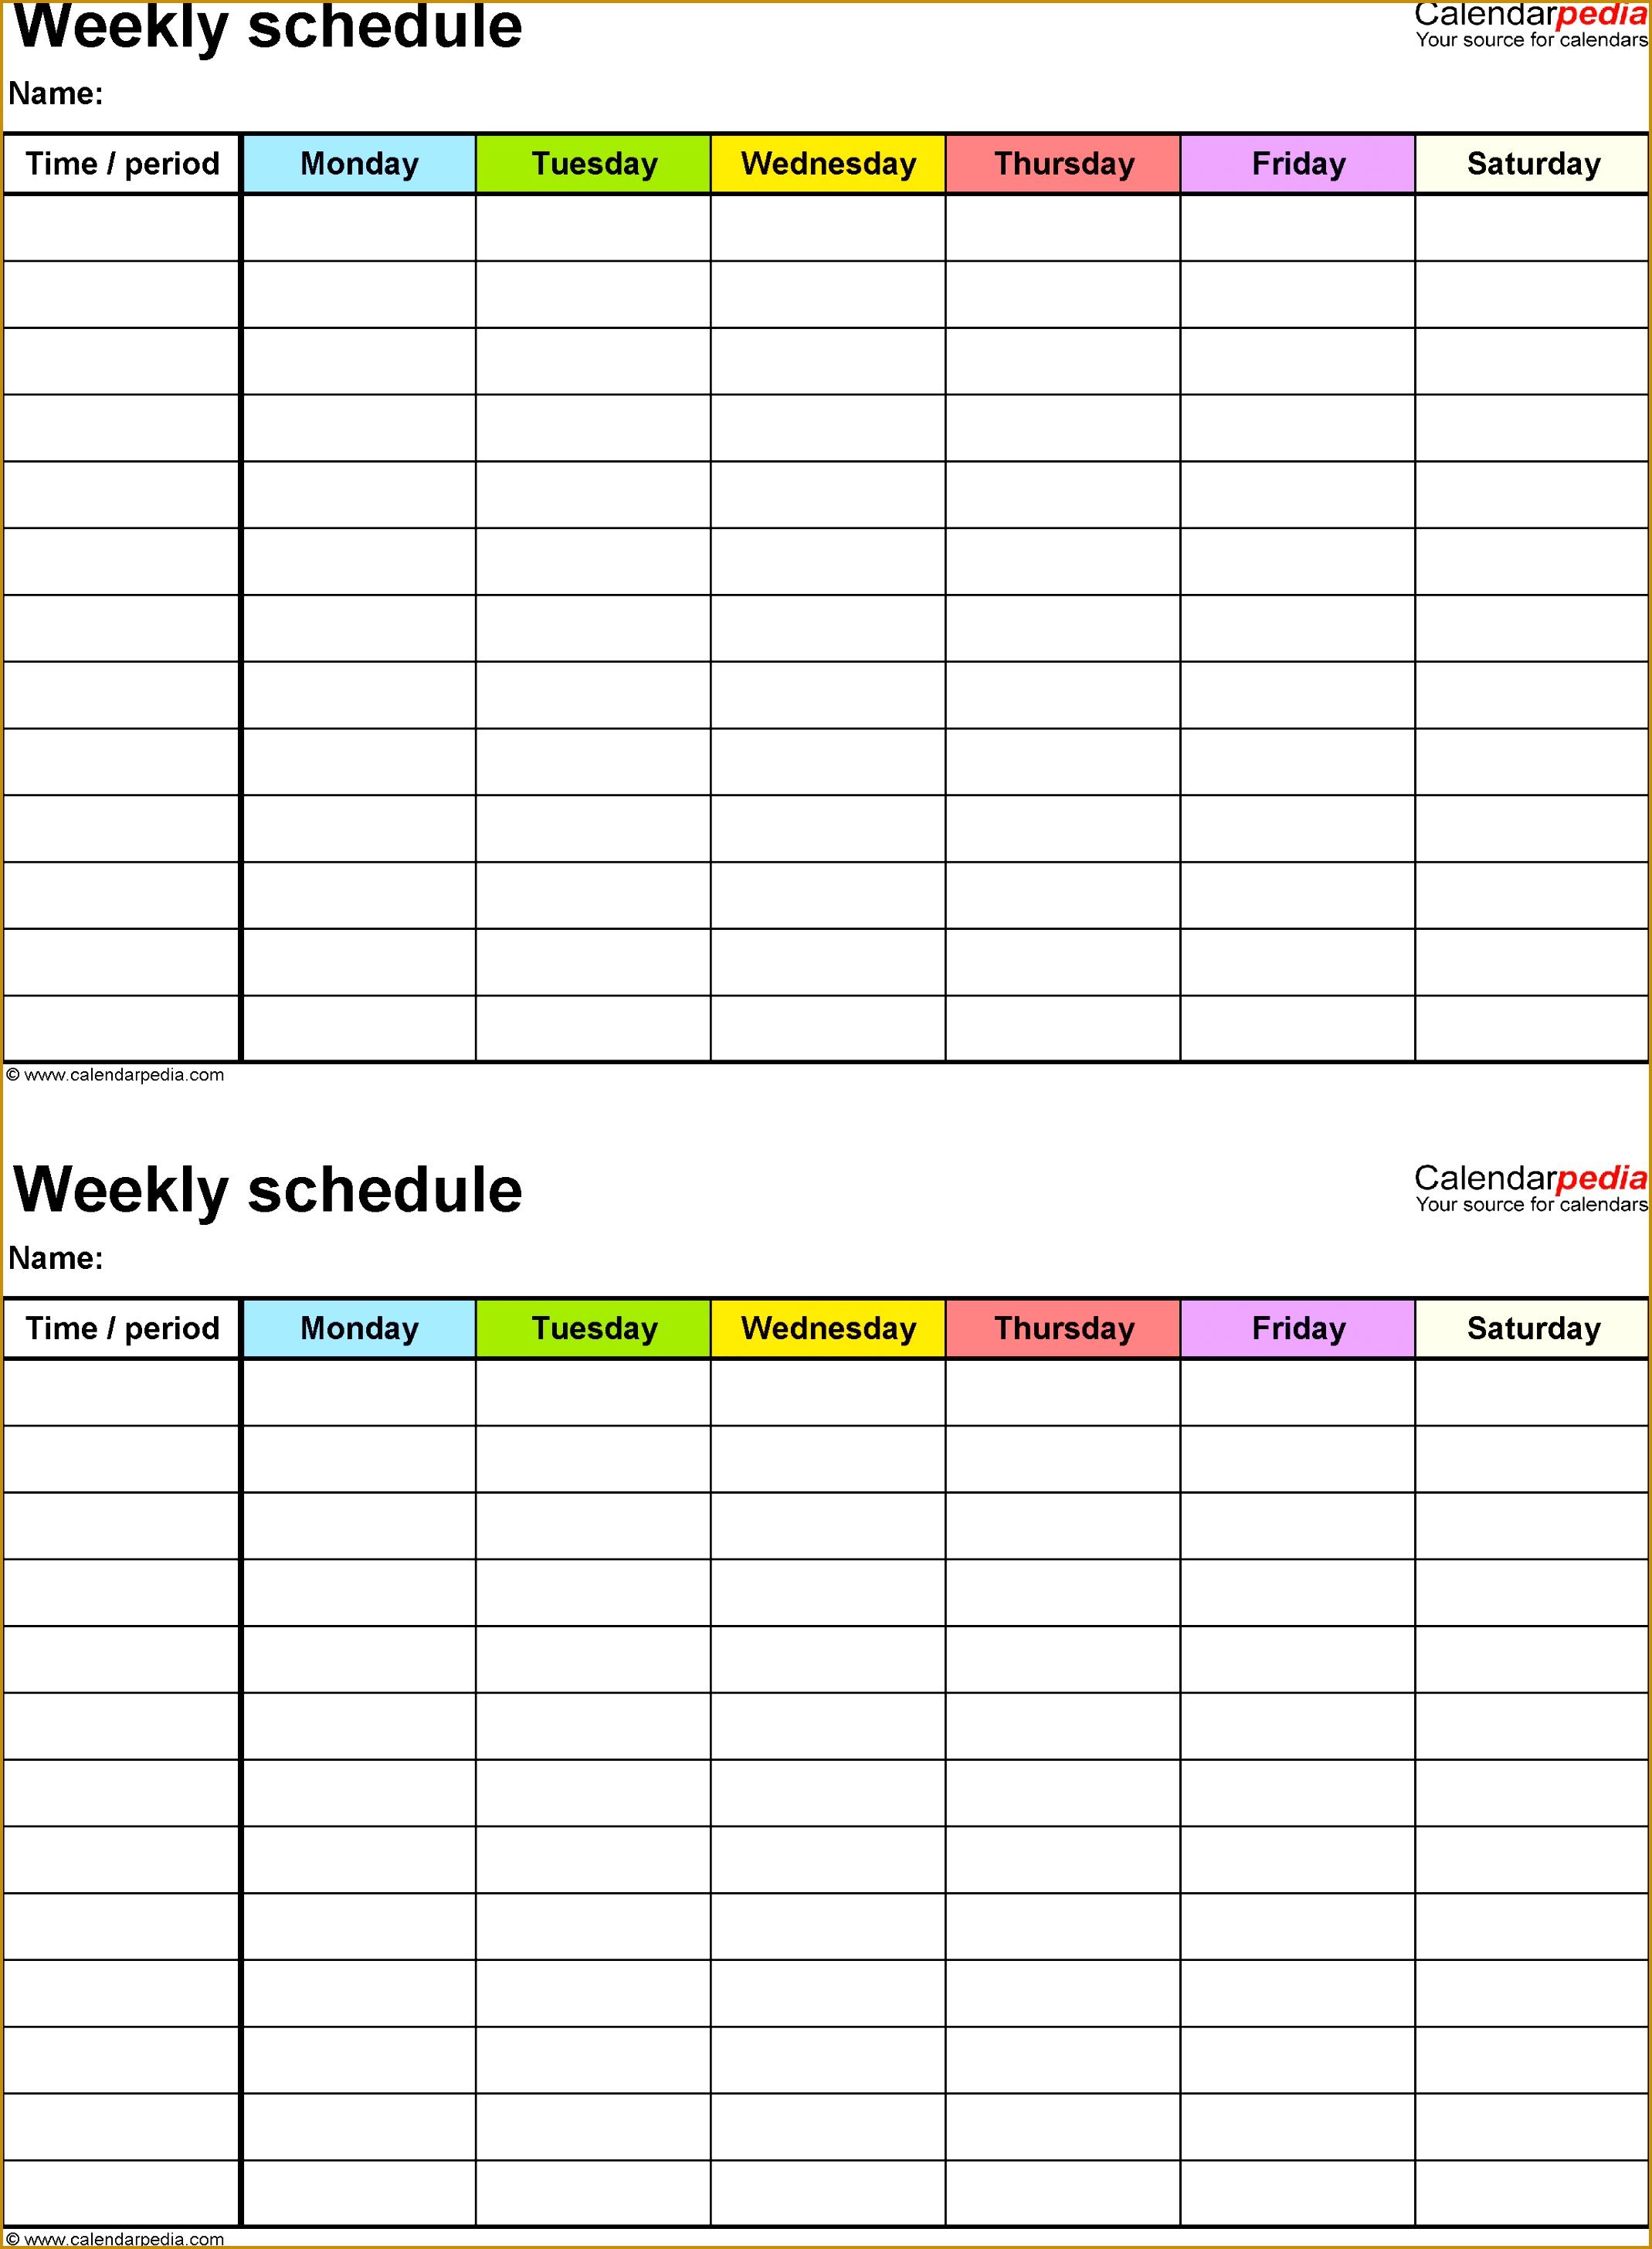 Weekly schedule template for Word version 9 2 schedules on one page portrait 29122139